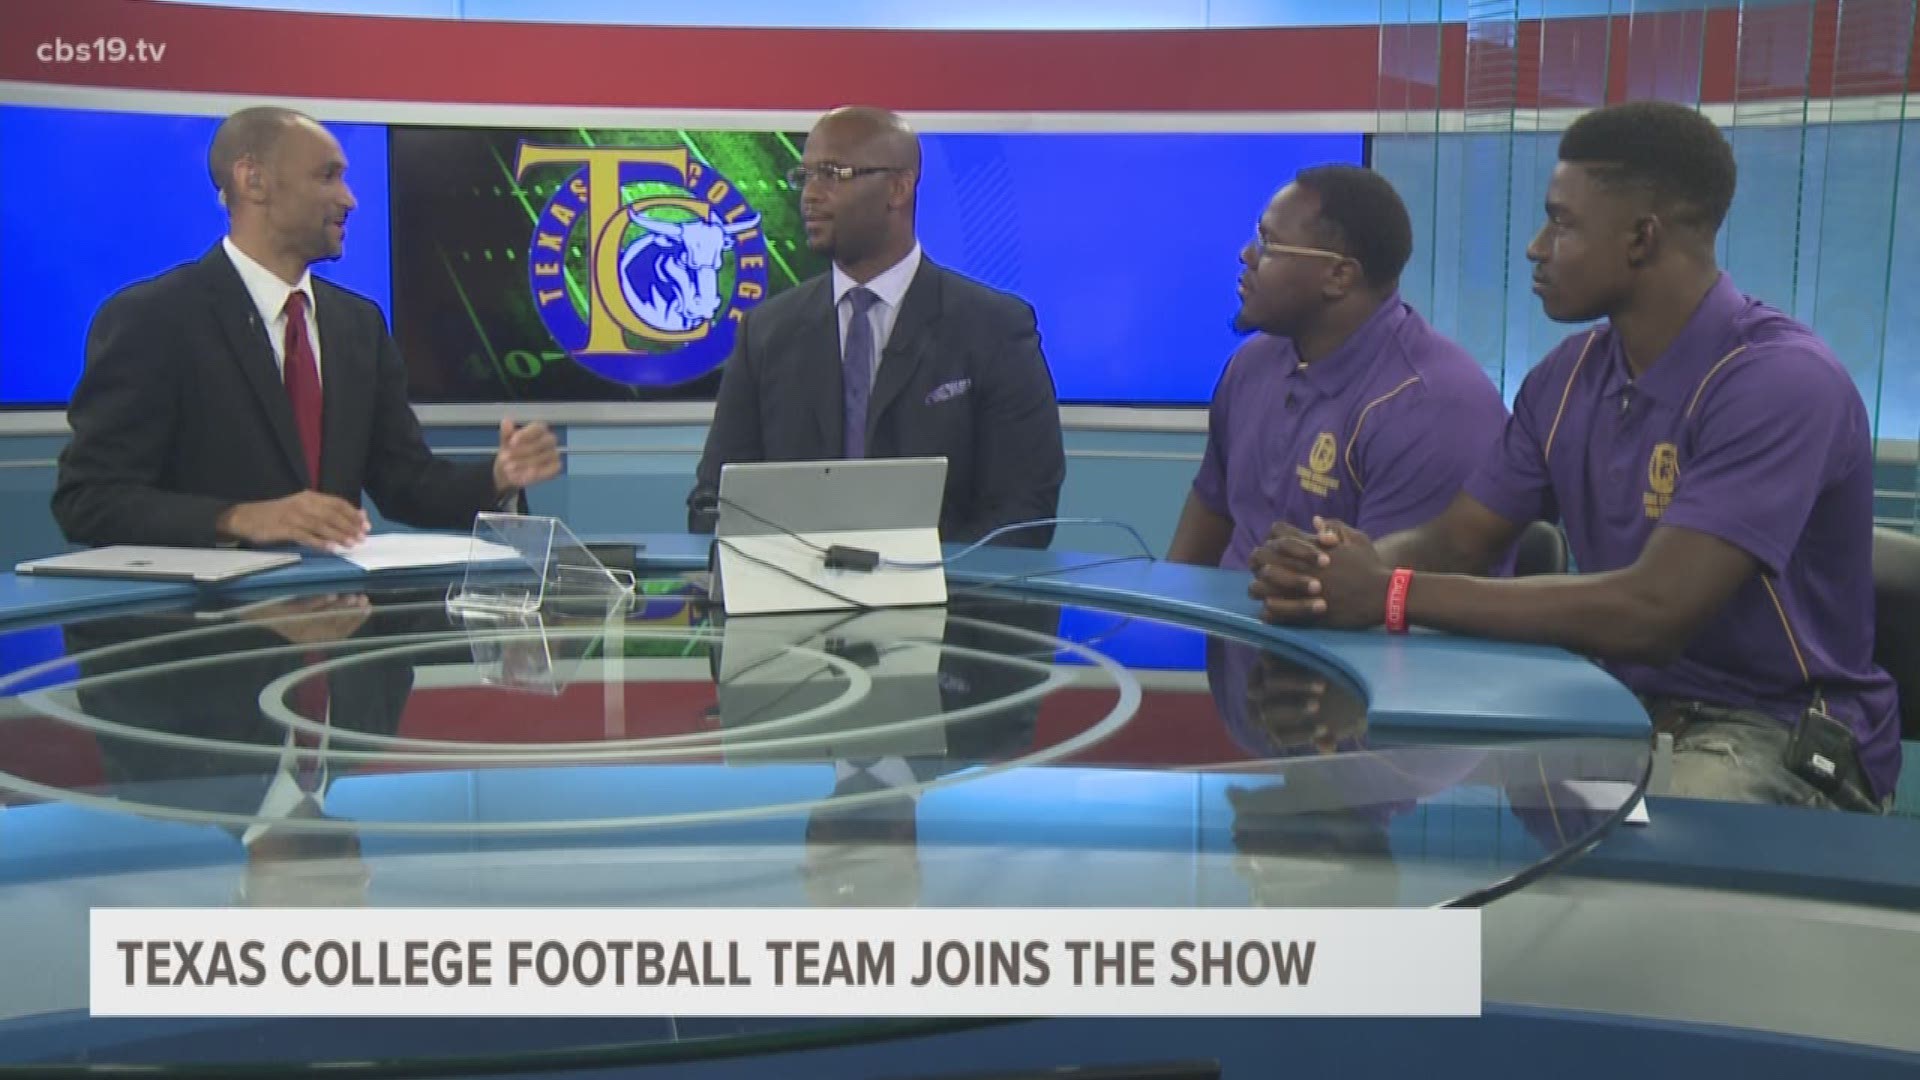 The Steers come on CBS-19 to talk about their upcoming football season.